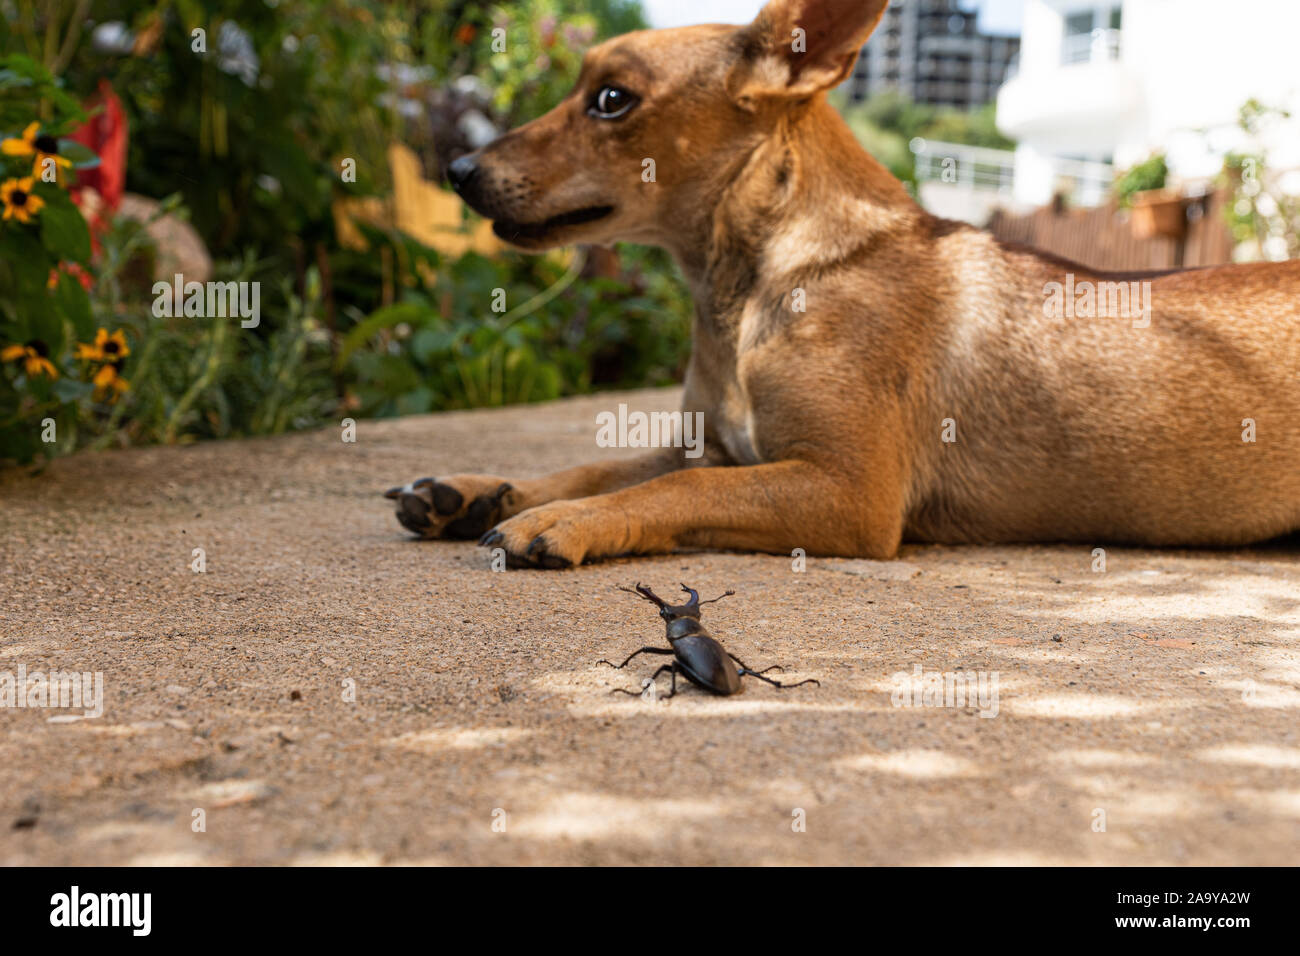 a cheeky stag-beetle attacks a funny dog. Funny scene. Big and small. Stock Photo